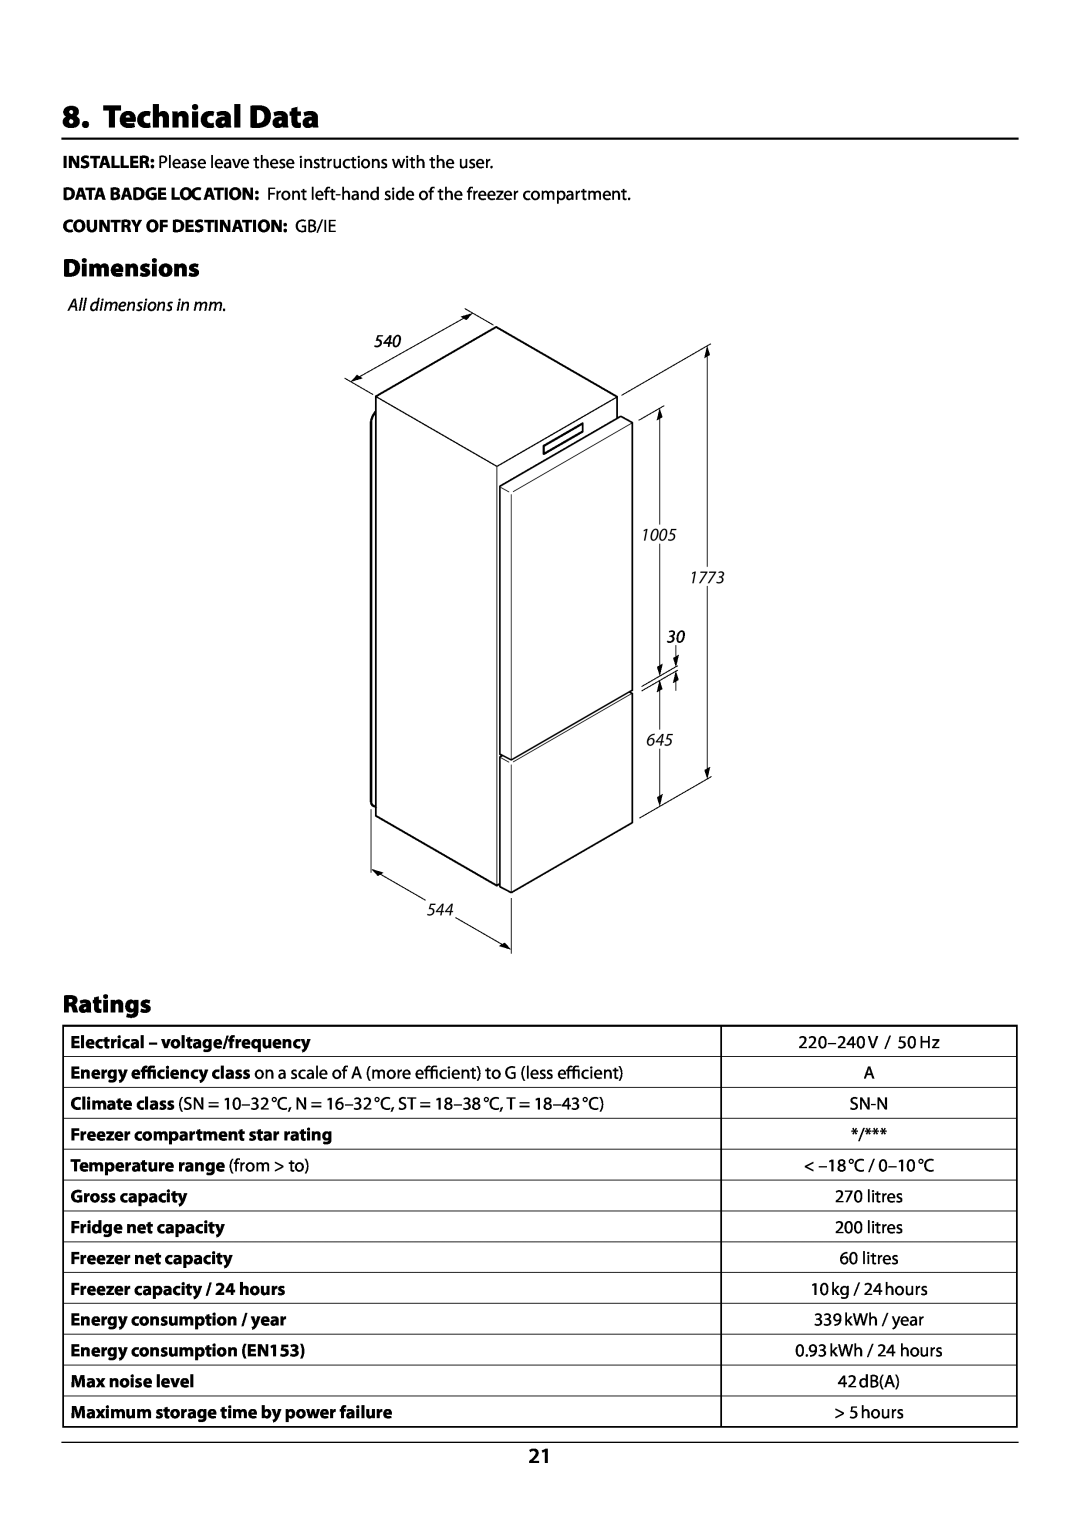 Rangemaster U110122-01B Technical Data, Dimensions, Ratings, coUntrY of DestInatIon GB/IE, All dimensions in mm 540 1005 